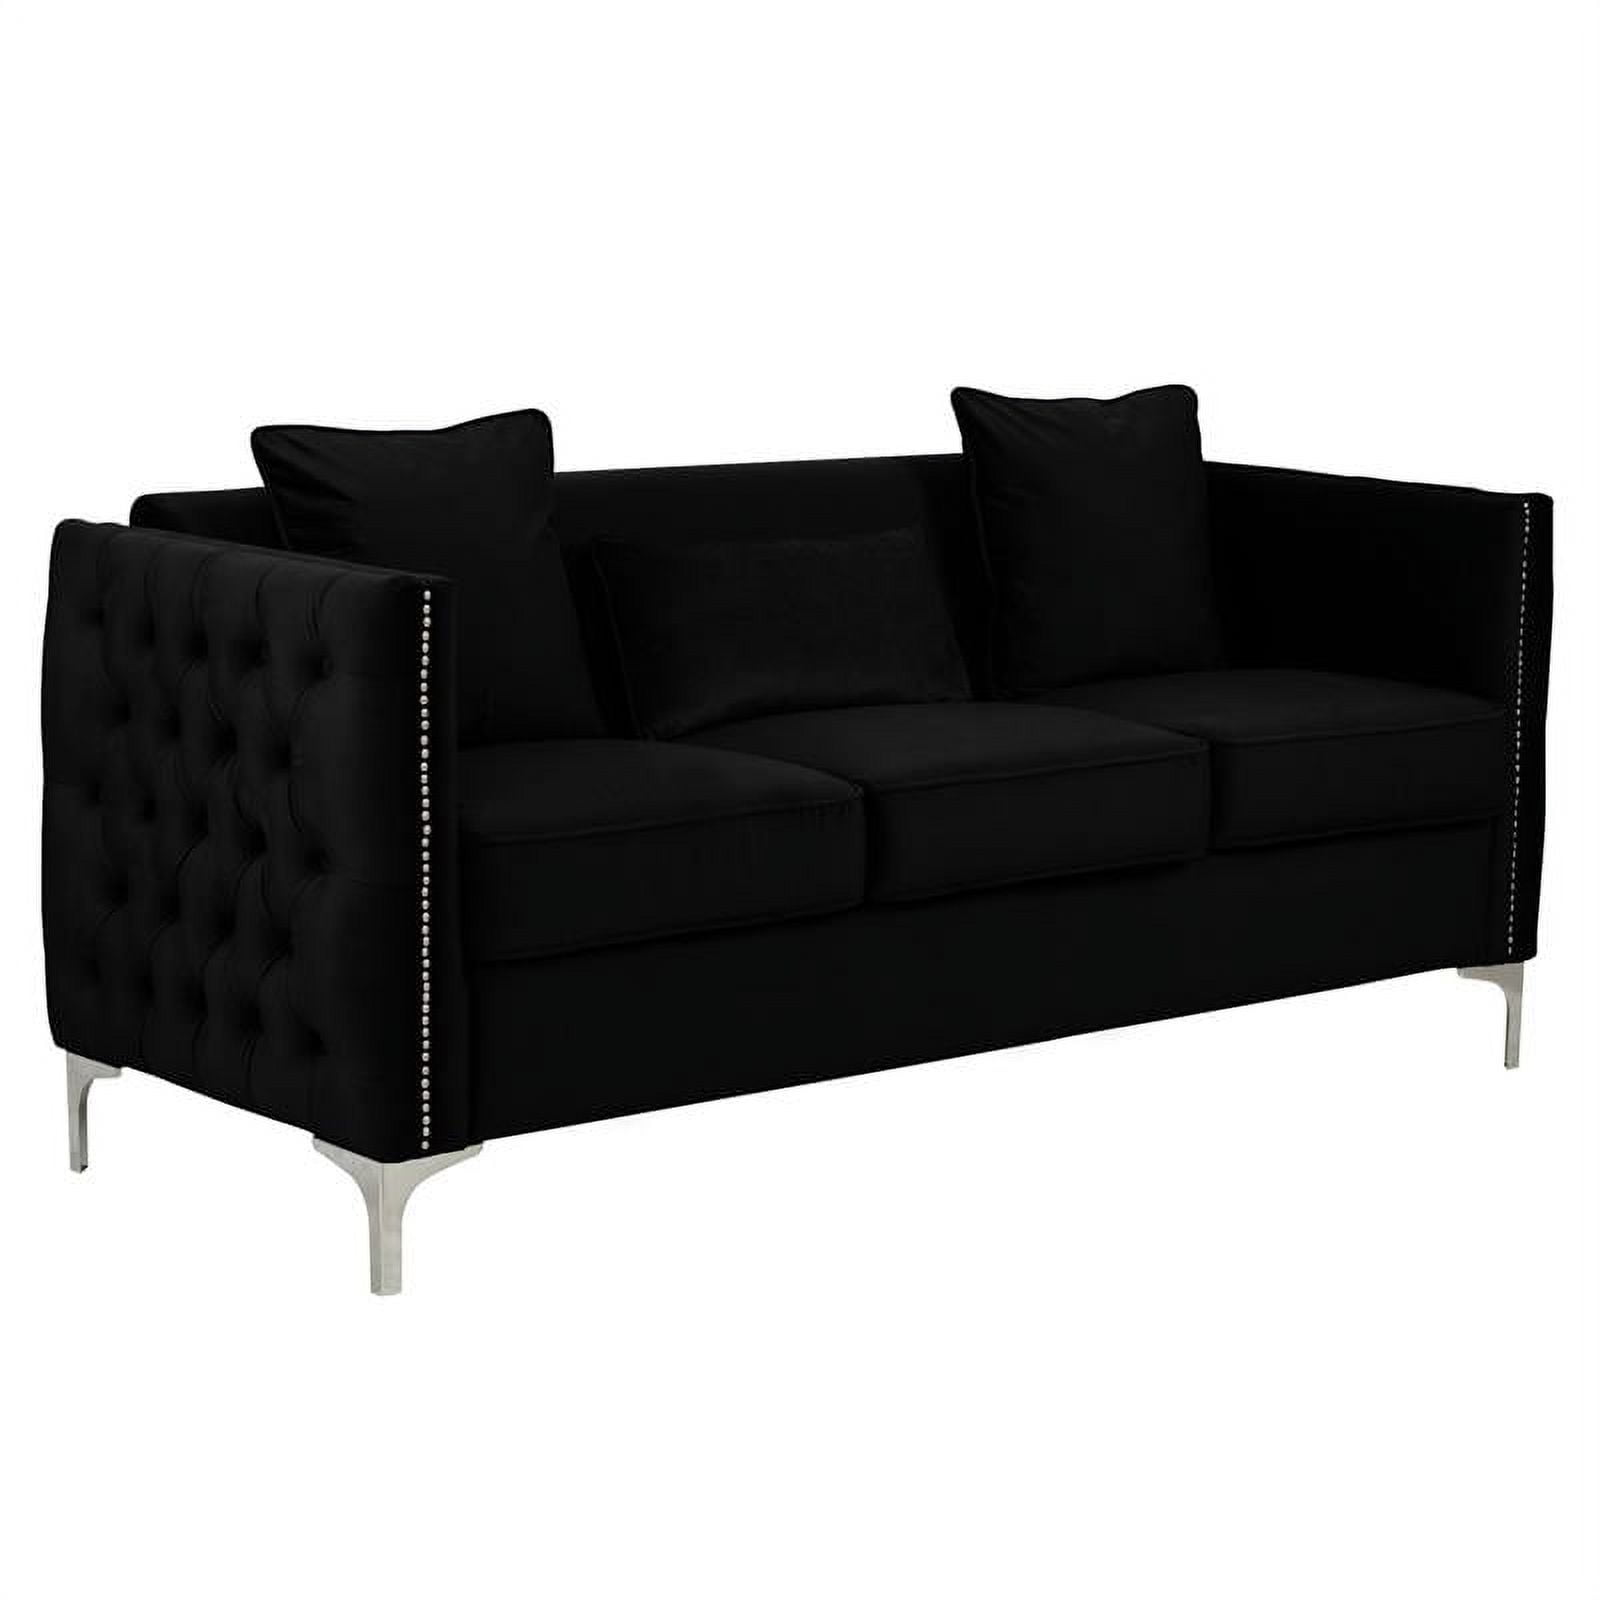 Bayberry Black Velvet Fabric Sofa Couch with 3 Pillows - Walmart.com